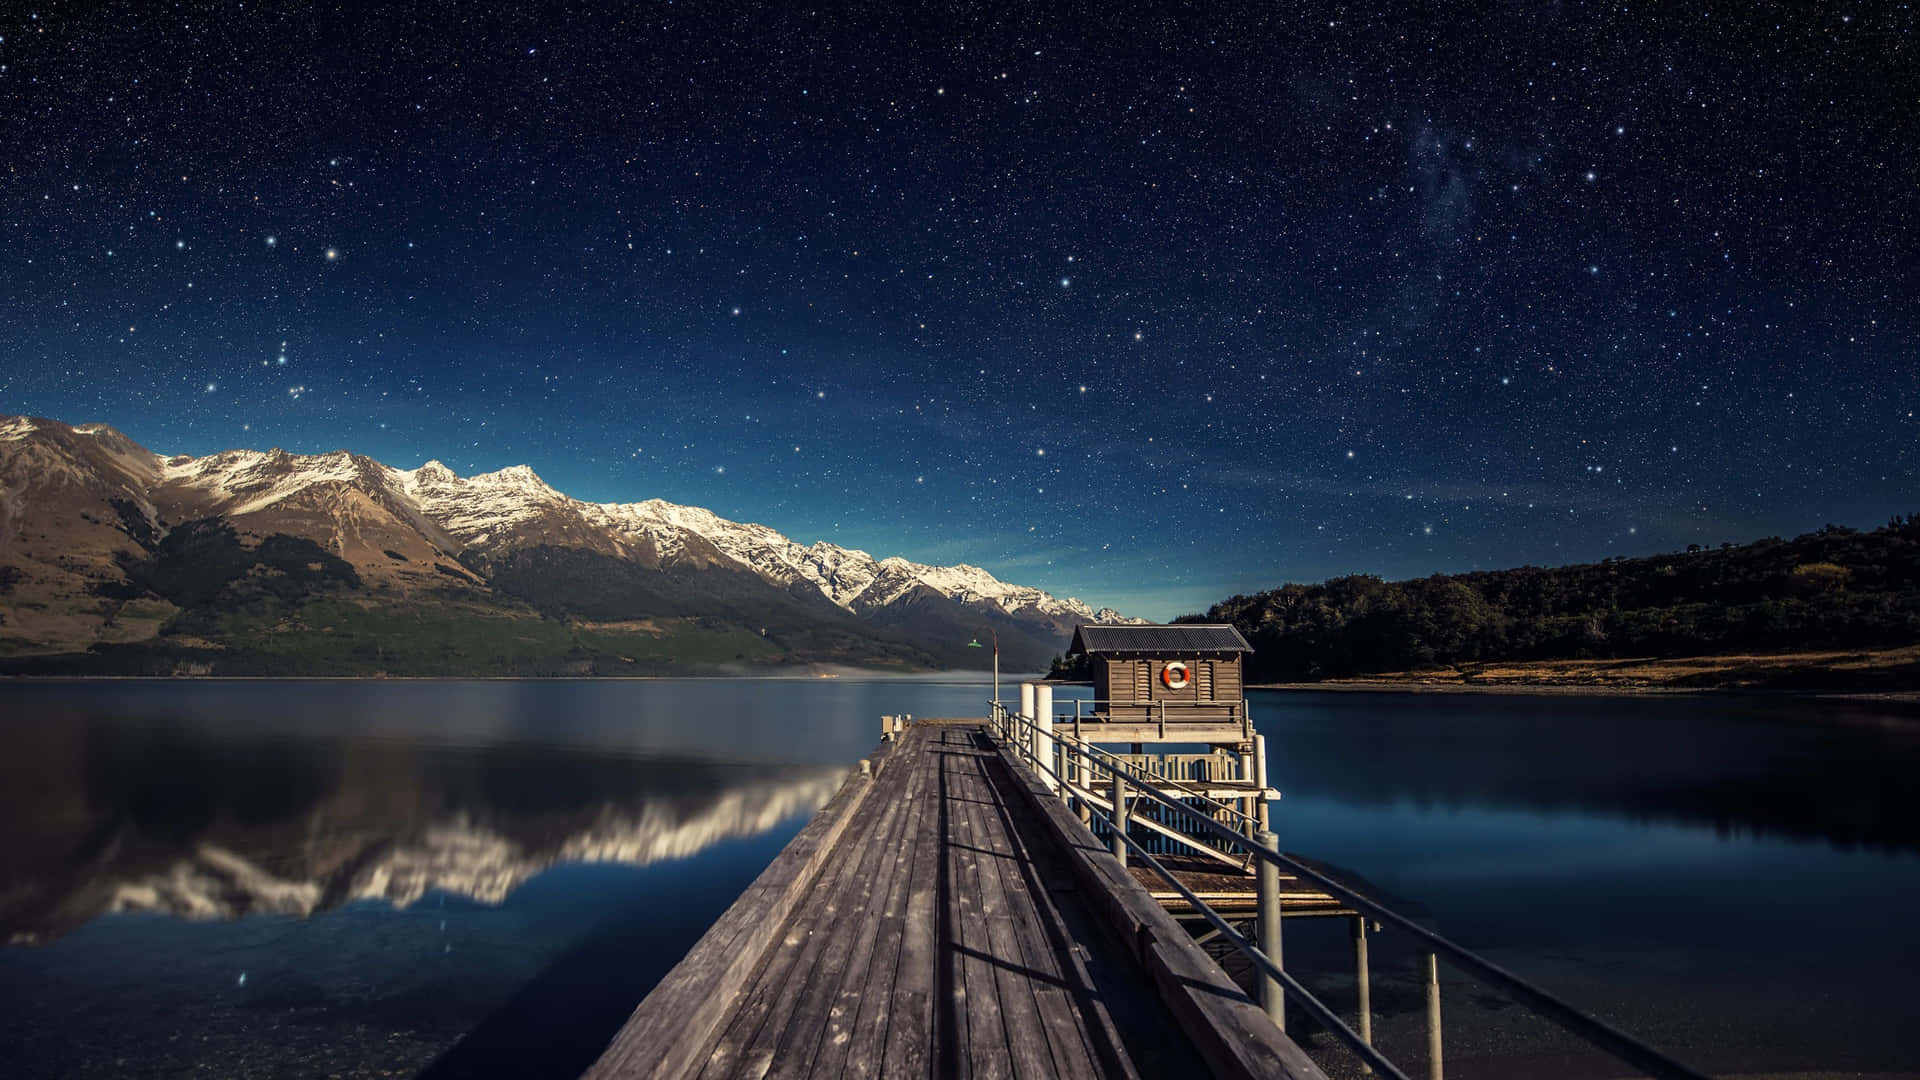 A Dock With A Starry Sky And Mountains